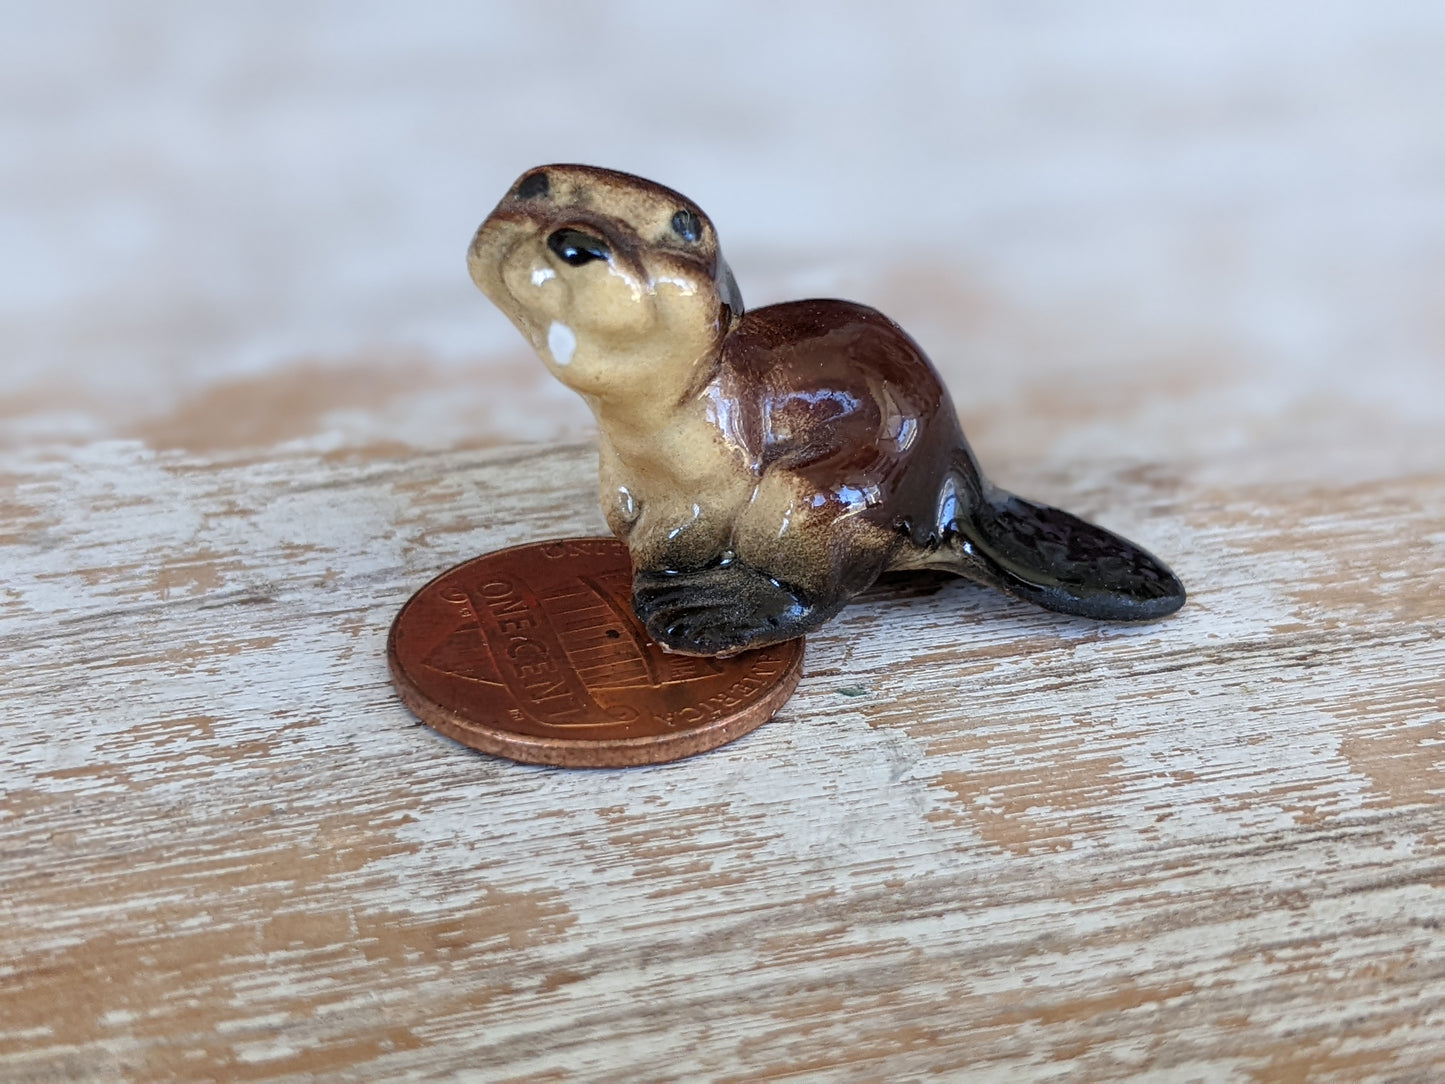 1980s Hagen Renaker Beaver Porcelain Miniature Hand-painted !! Amazing Retro Gifts & Collectibles !!